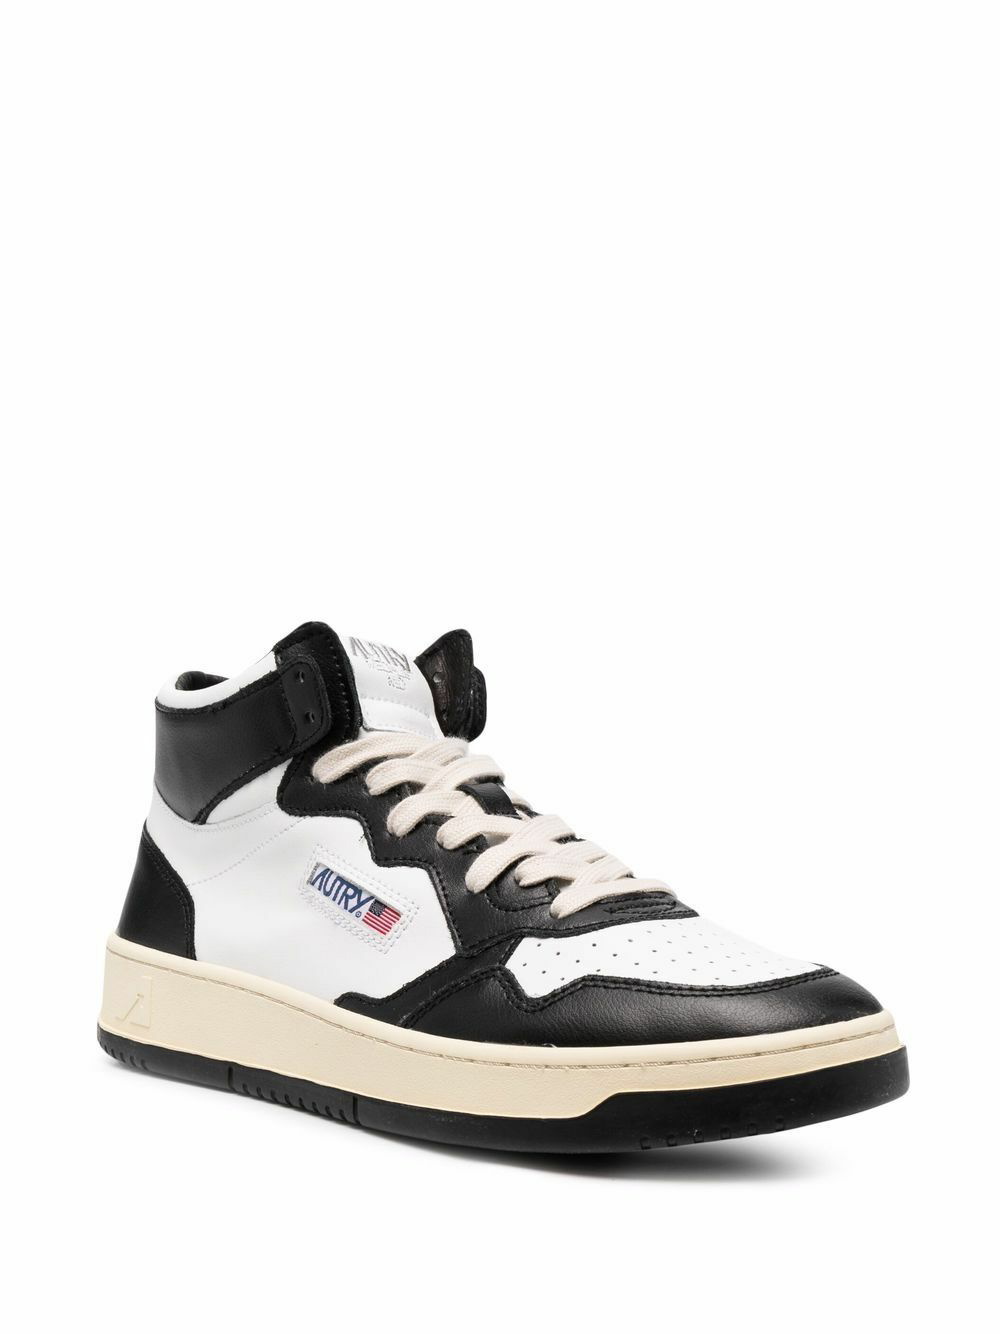 AUTRY - Medialist Mid Leather Sneakers Autry